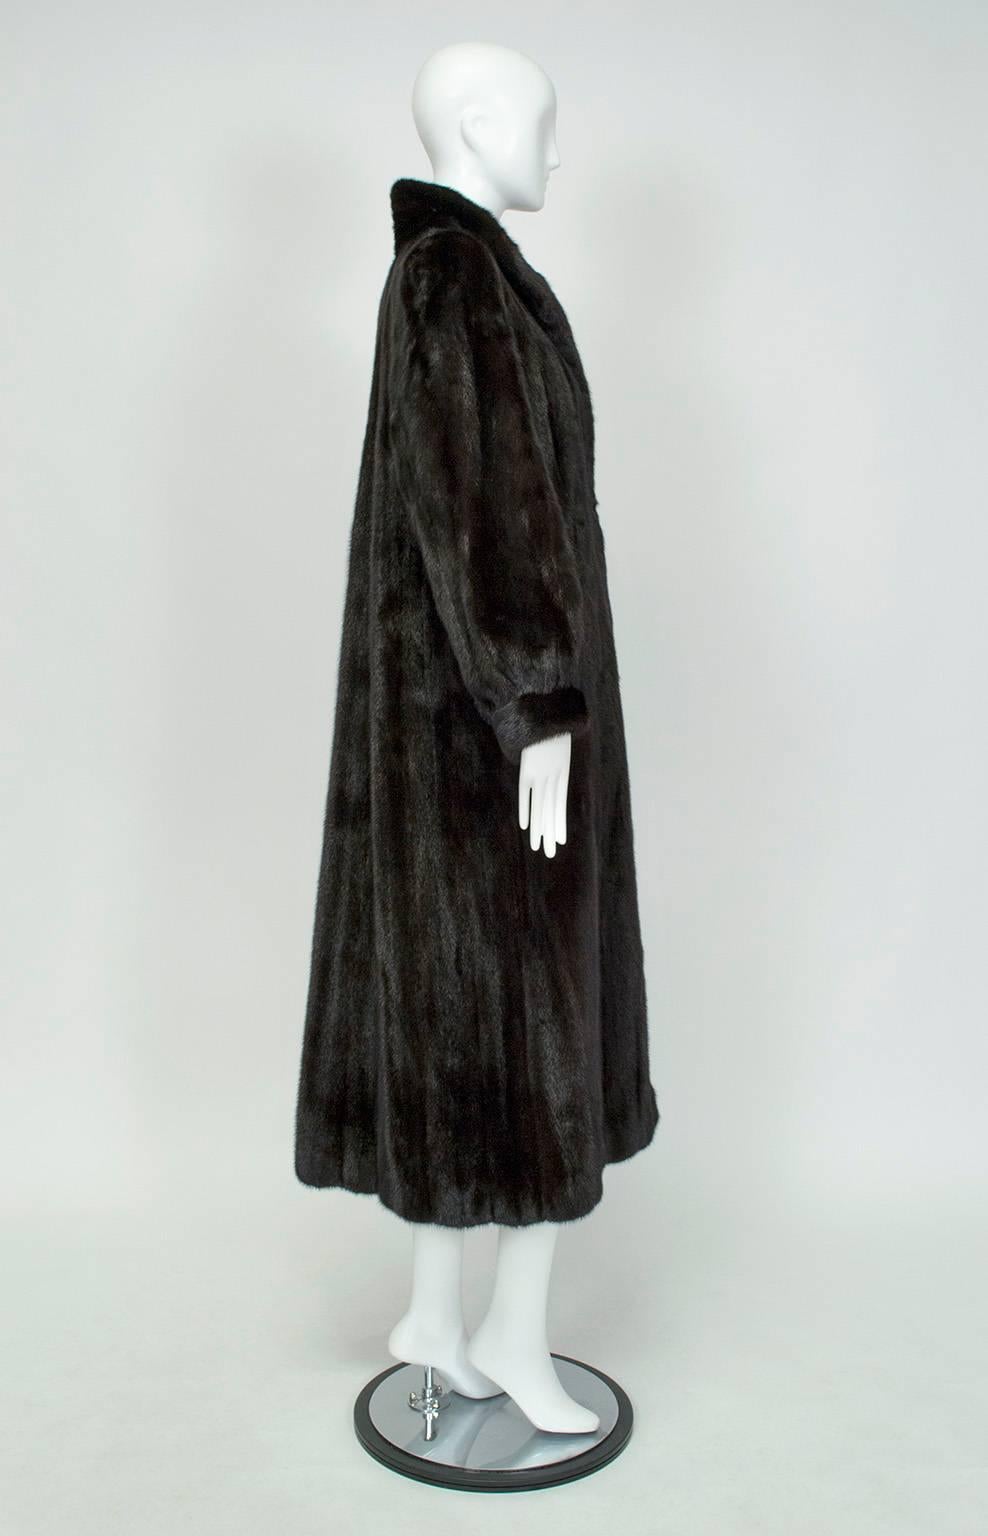 In immaculate condition, this Blackglama ranch mink was purchased in 2006 and worn once. Since then it has been in fur storage, professionally cleaned and glazed, and remains as spectacular as it was the day it was bought. The shawl collar and